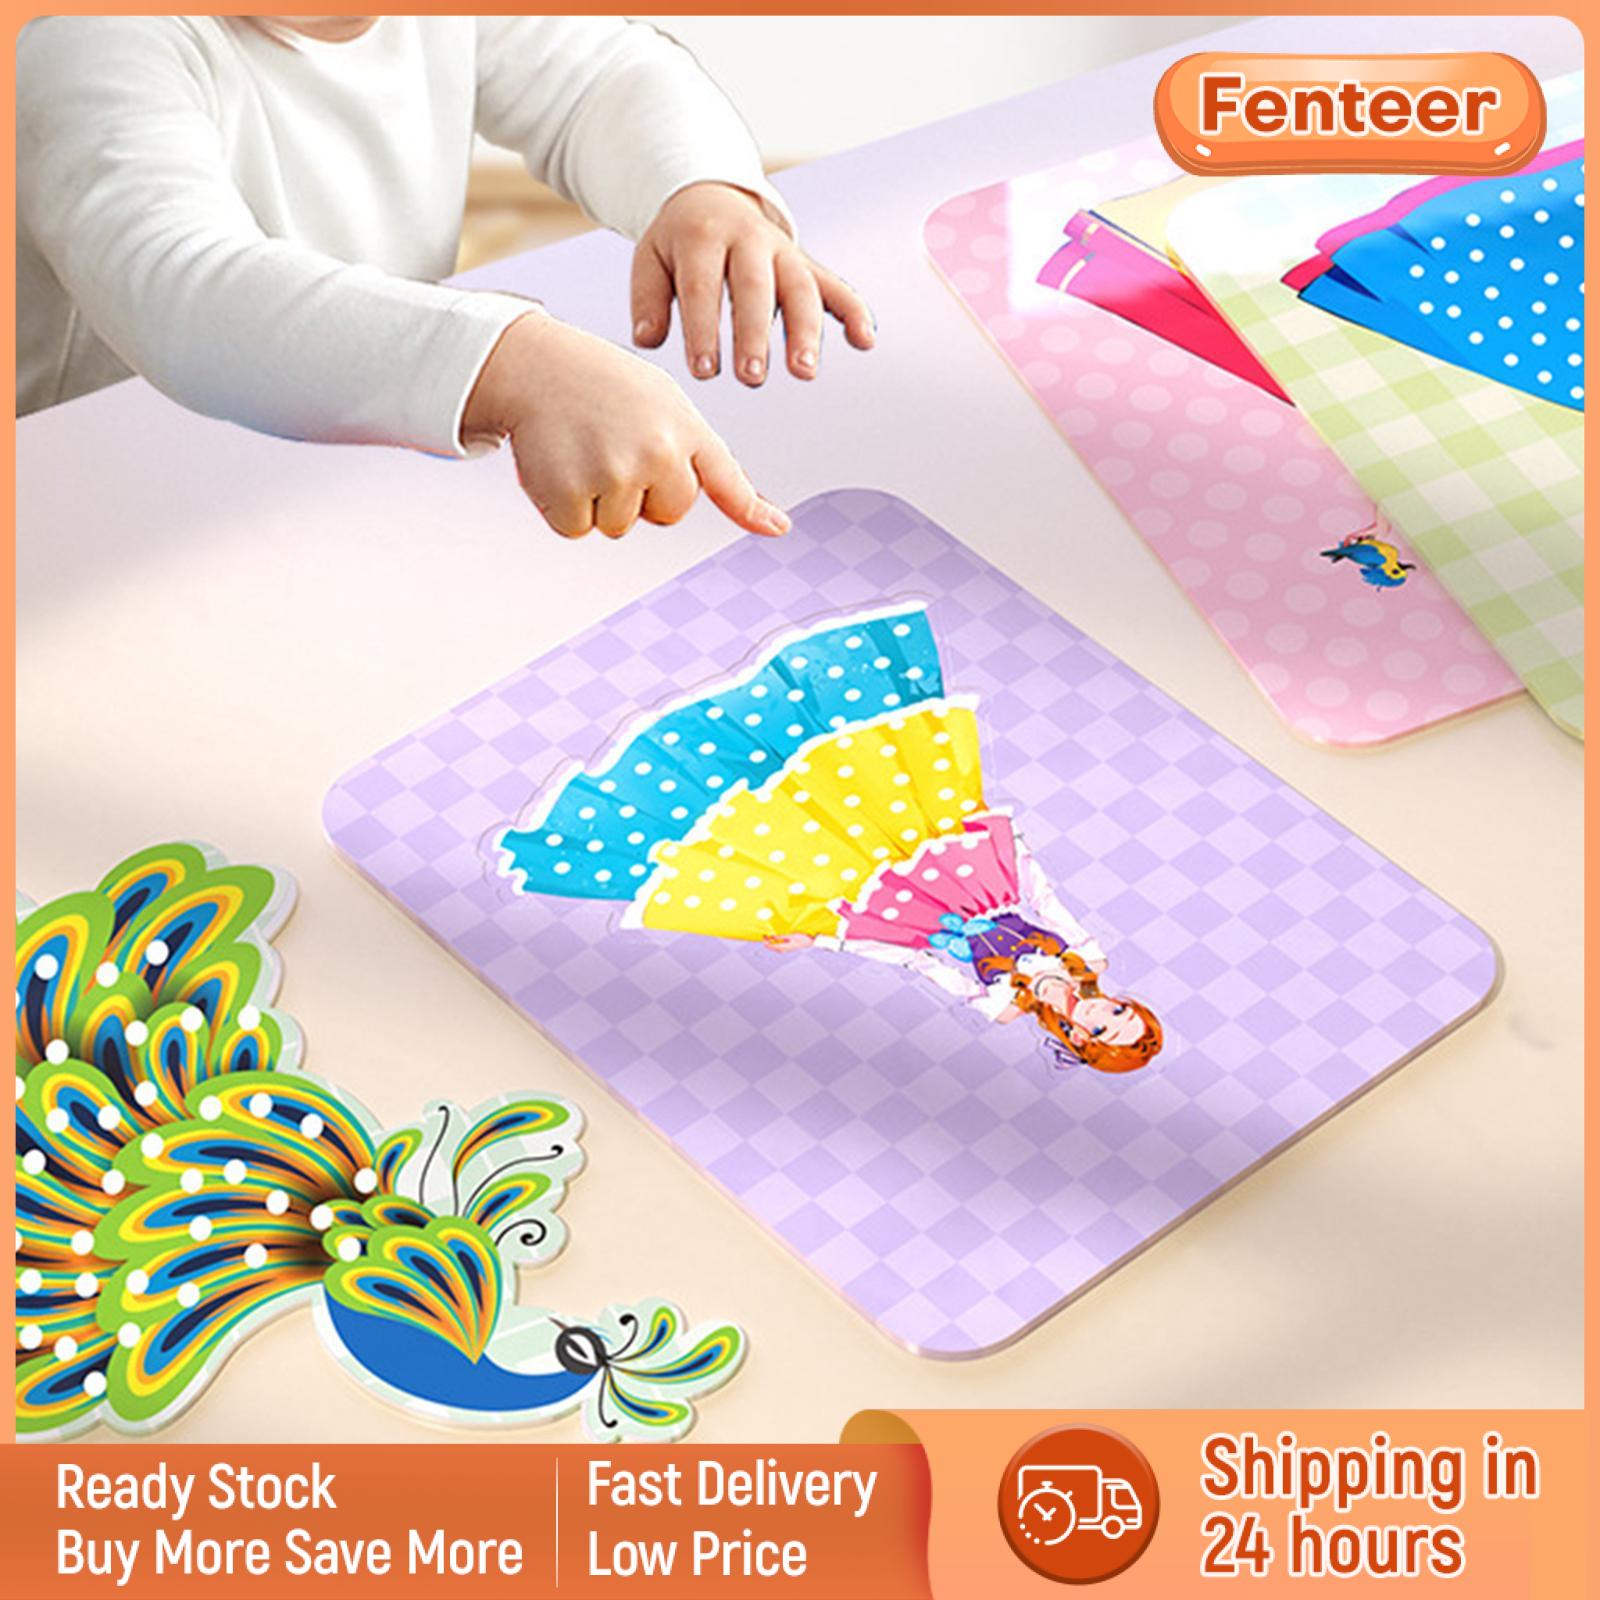 Fenteer DIY Painting Sticker Craft Toys Princess Dress 3D Pasted Painting